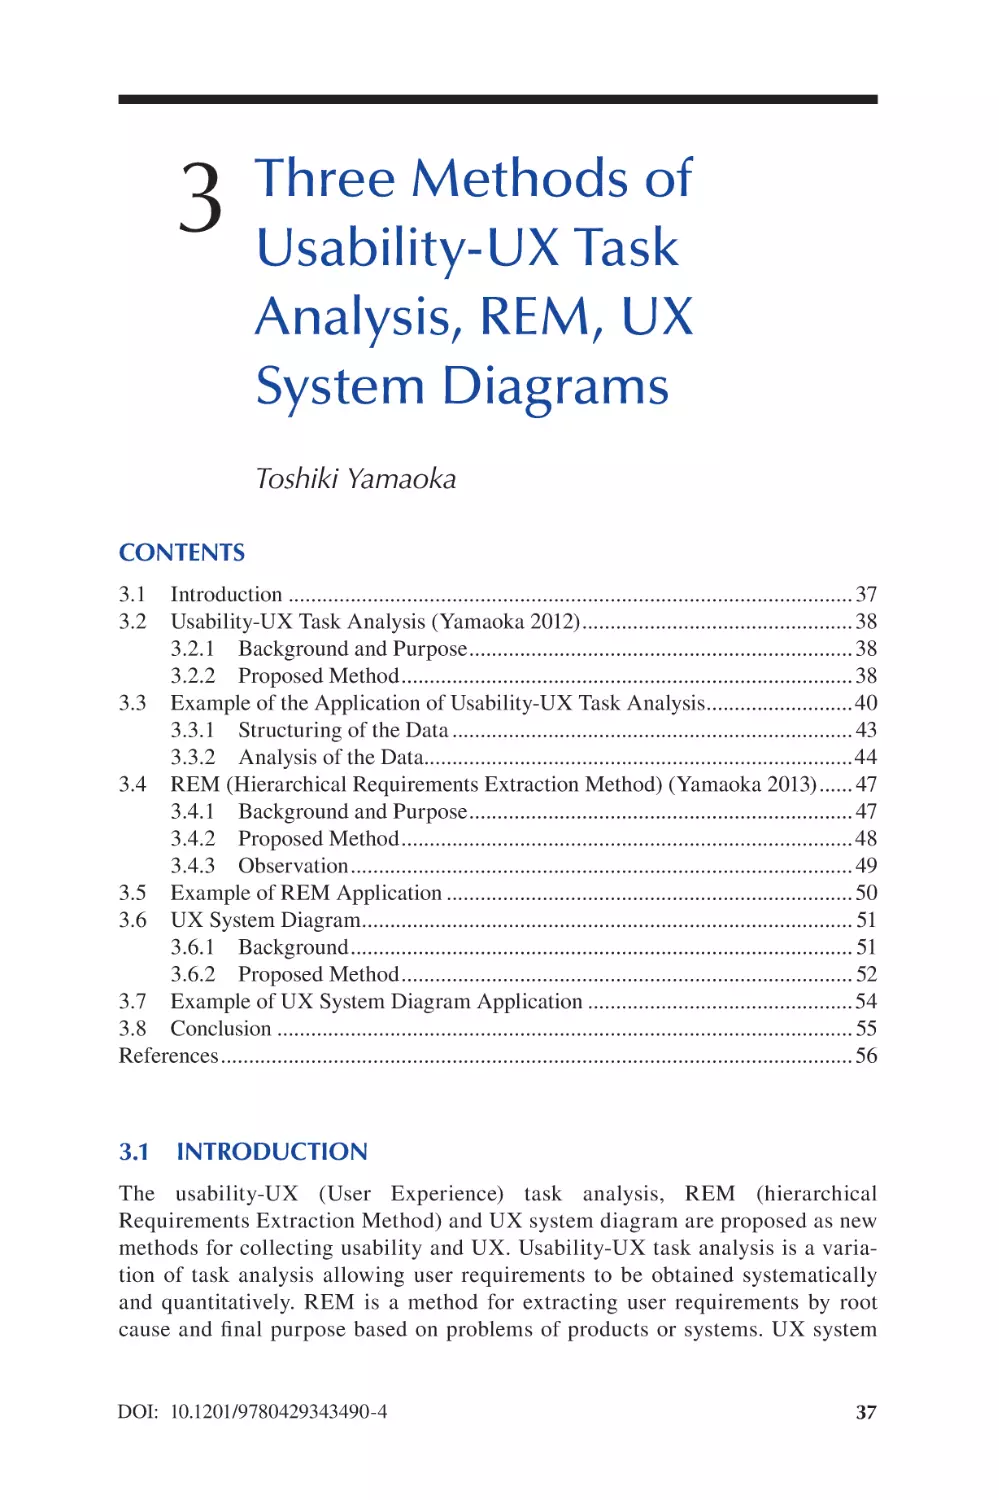 Chapter 3 Three Methods of Usability-UX Task Analysis, REM, UX System Diagrams
3.1 Introduction